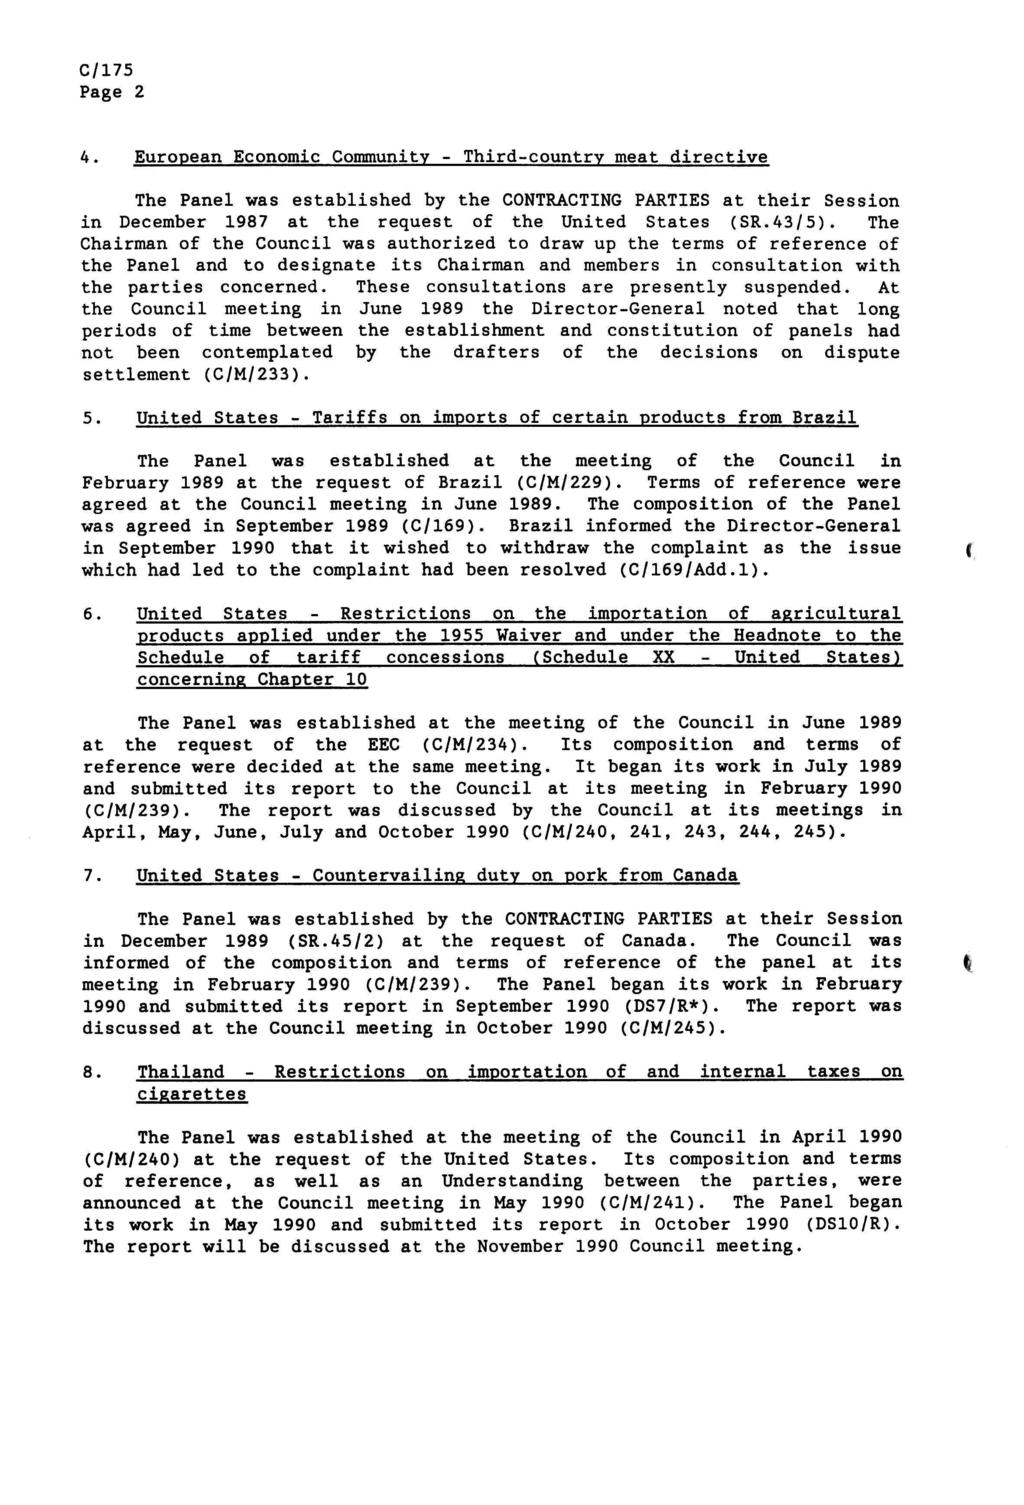 Page 2 4. European Economic Community - Third-country meat directive The Panel was established by the CONTRACTING PARTIES at their Session in December 1987 at the request of the United States (SR.